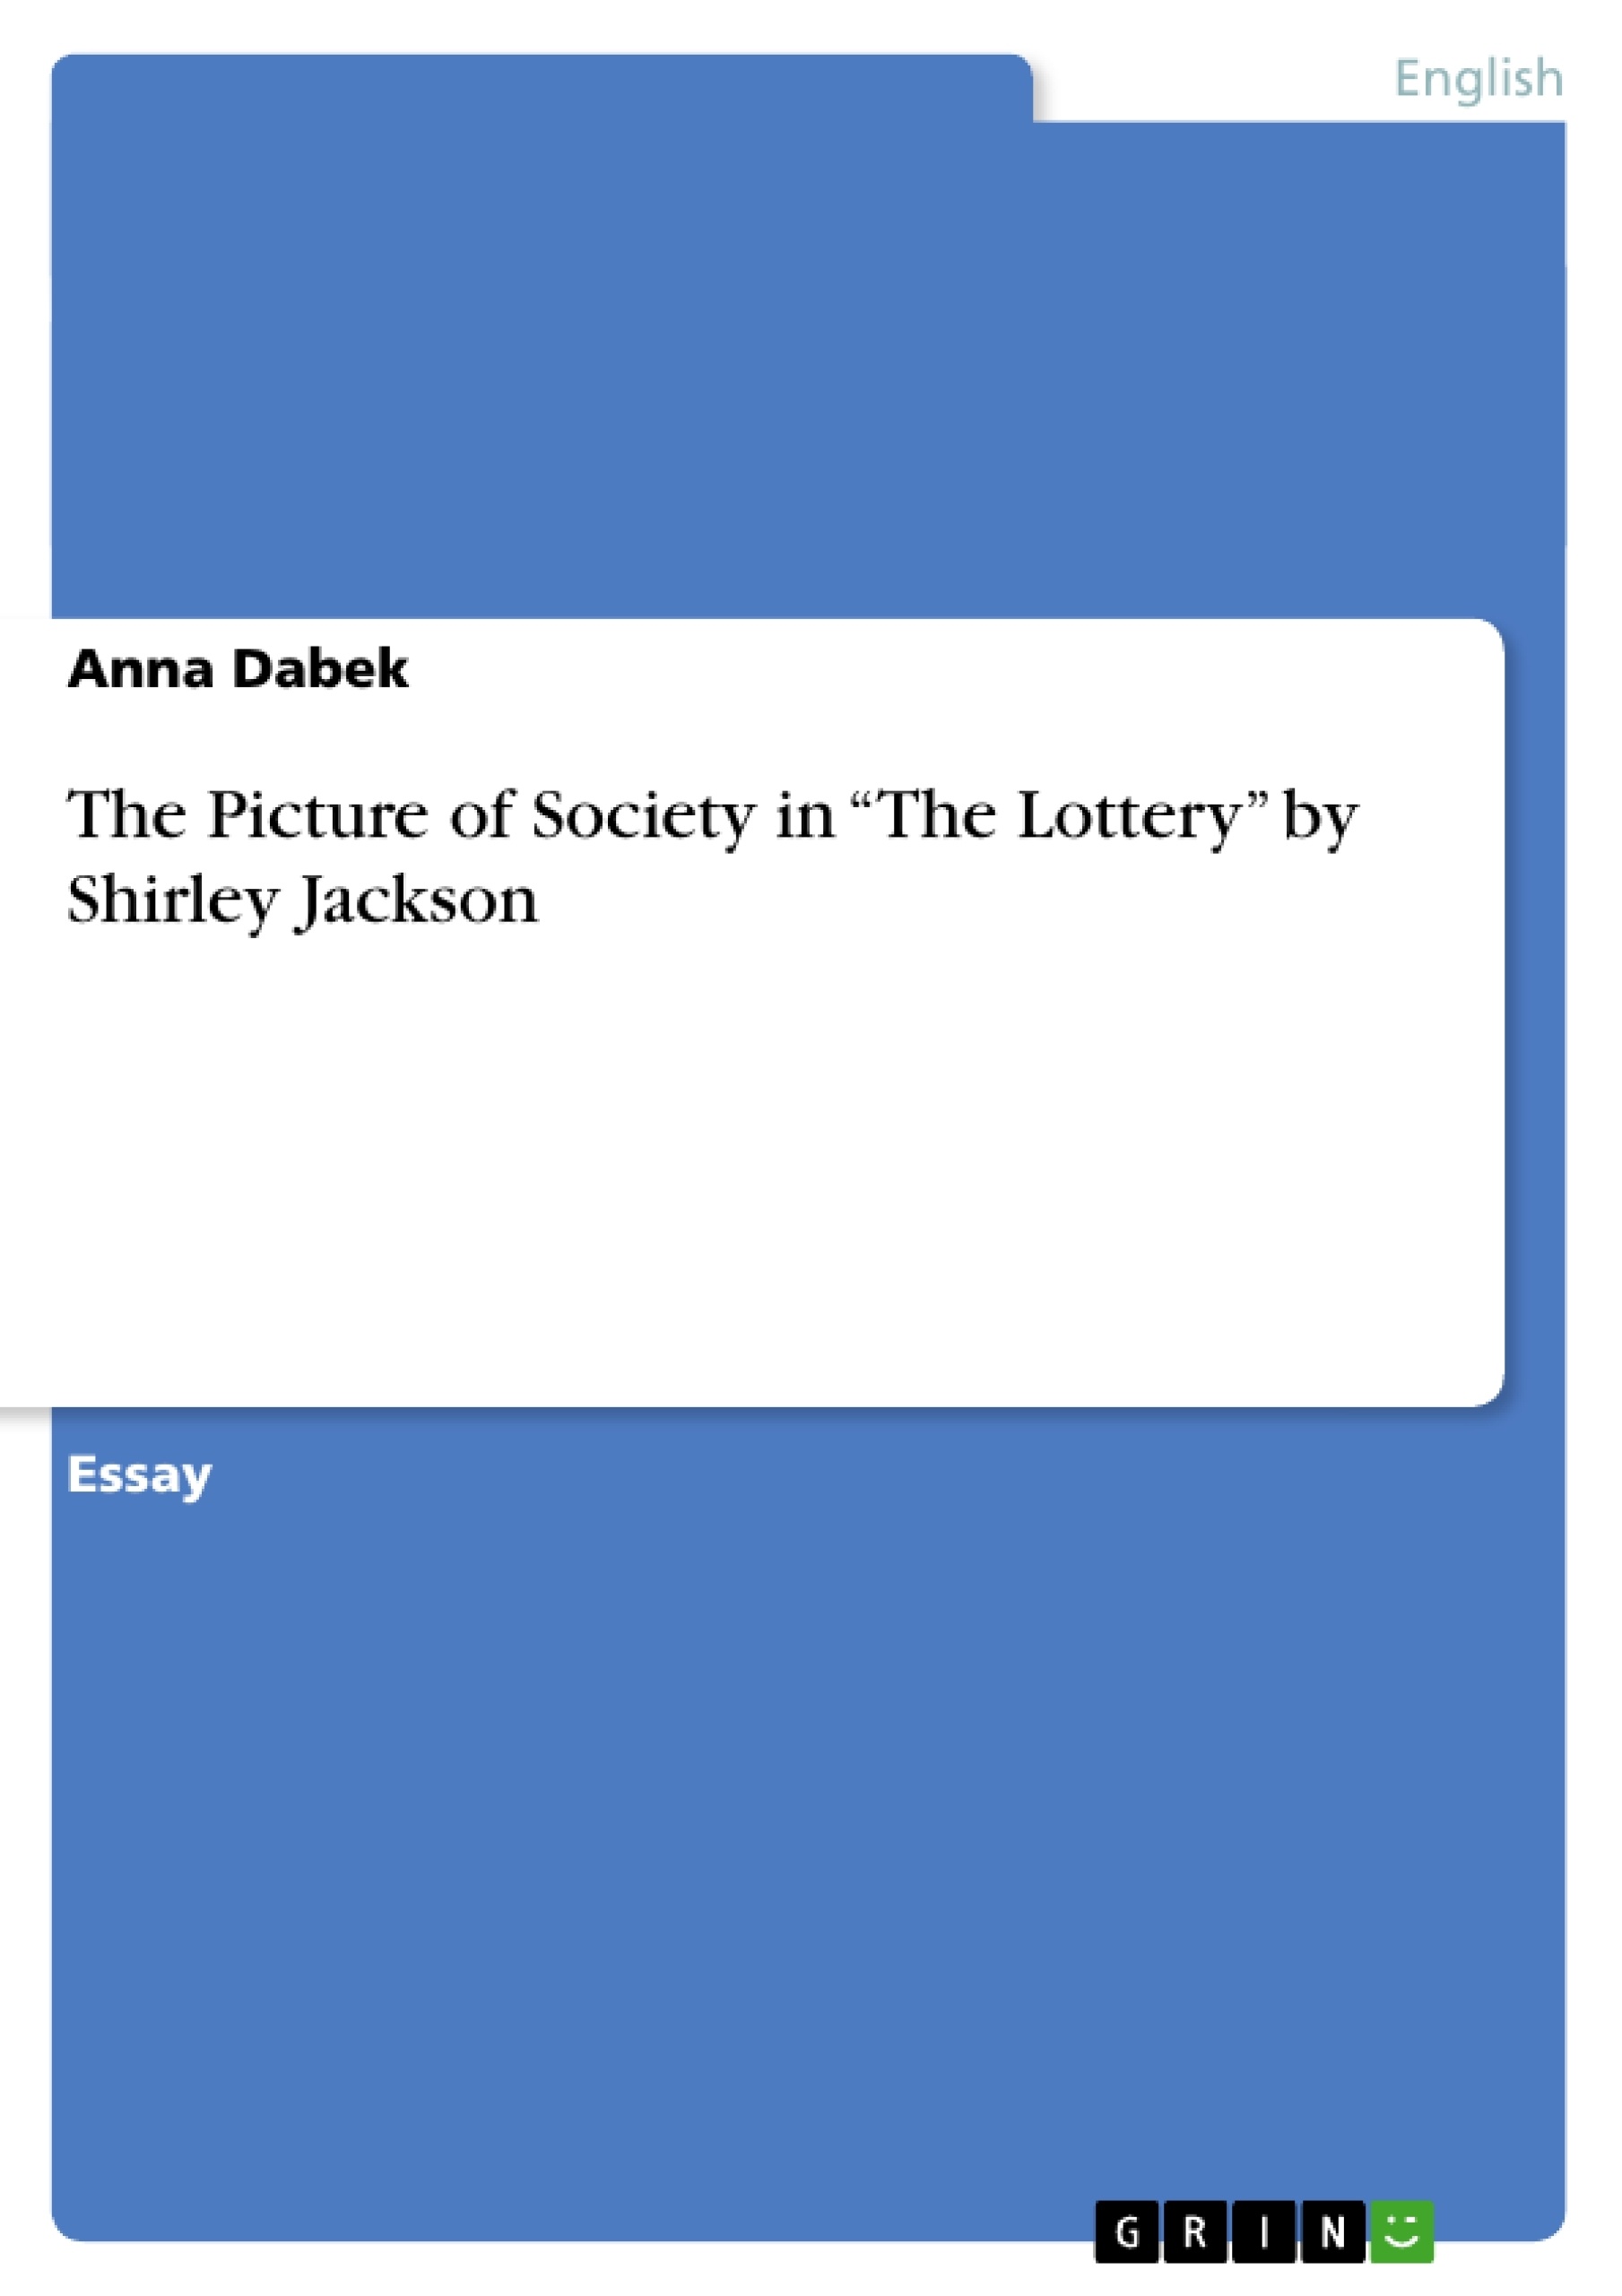 the lottery analysis essay